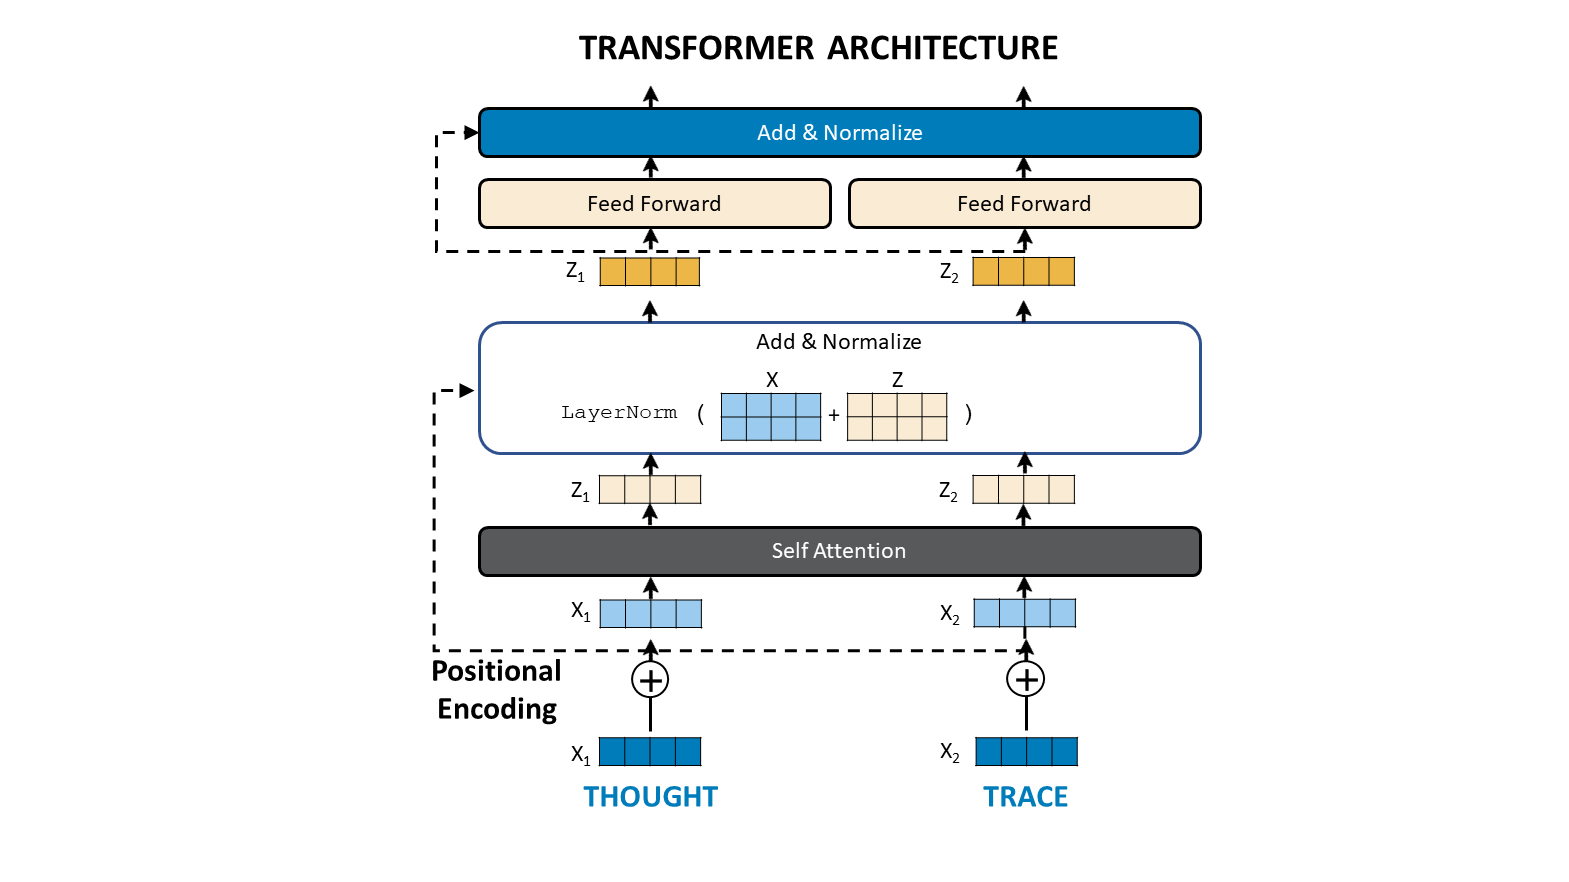 Why Bert A Review Of Transformer Architecture Thoughttrace